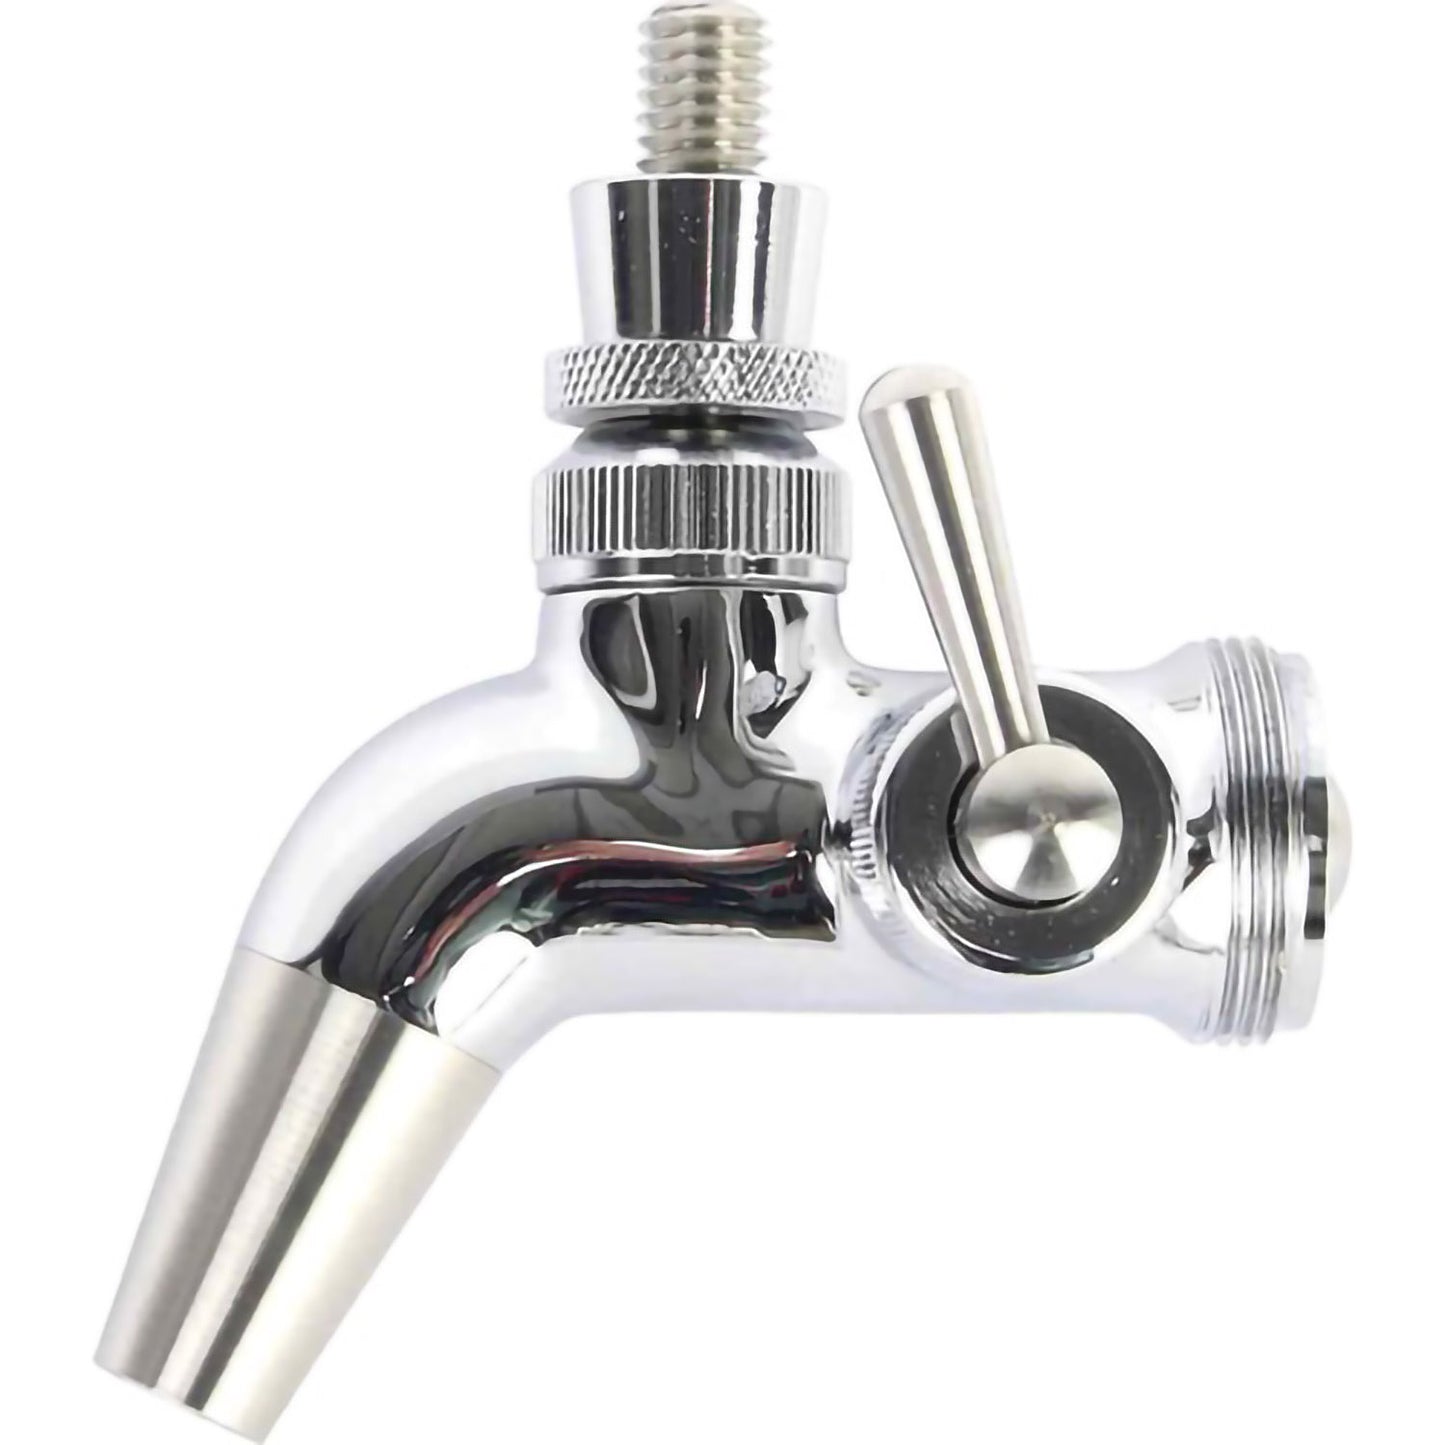 Stainless Steel Faucet with Flow Control